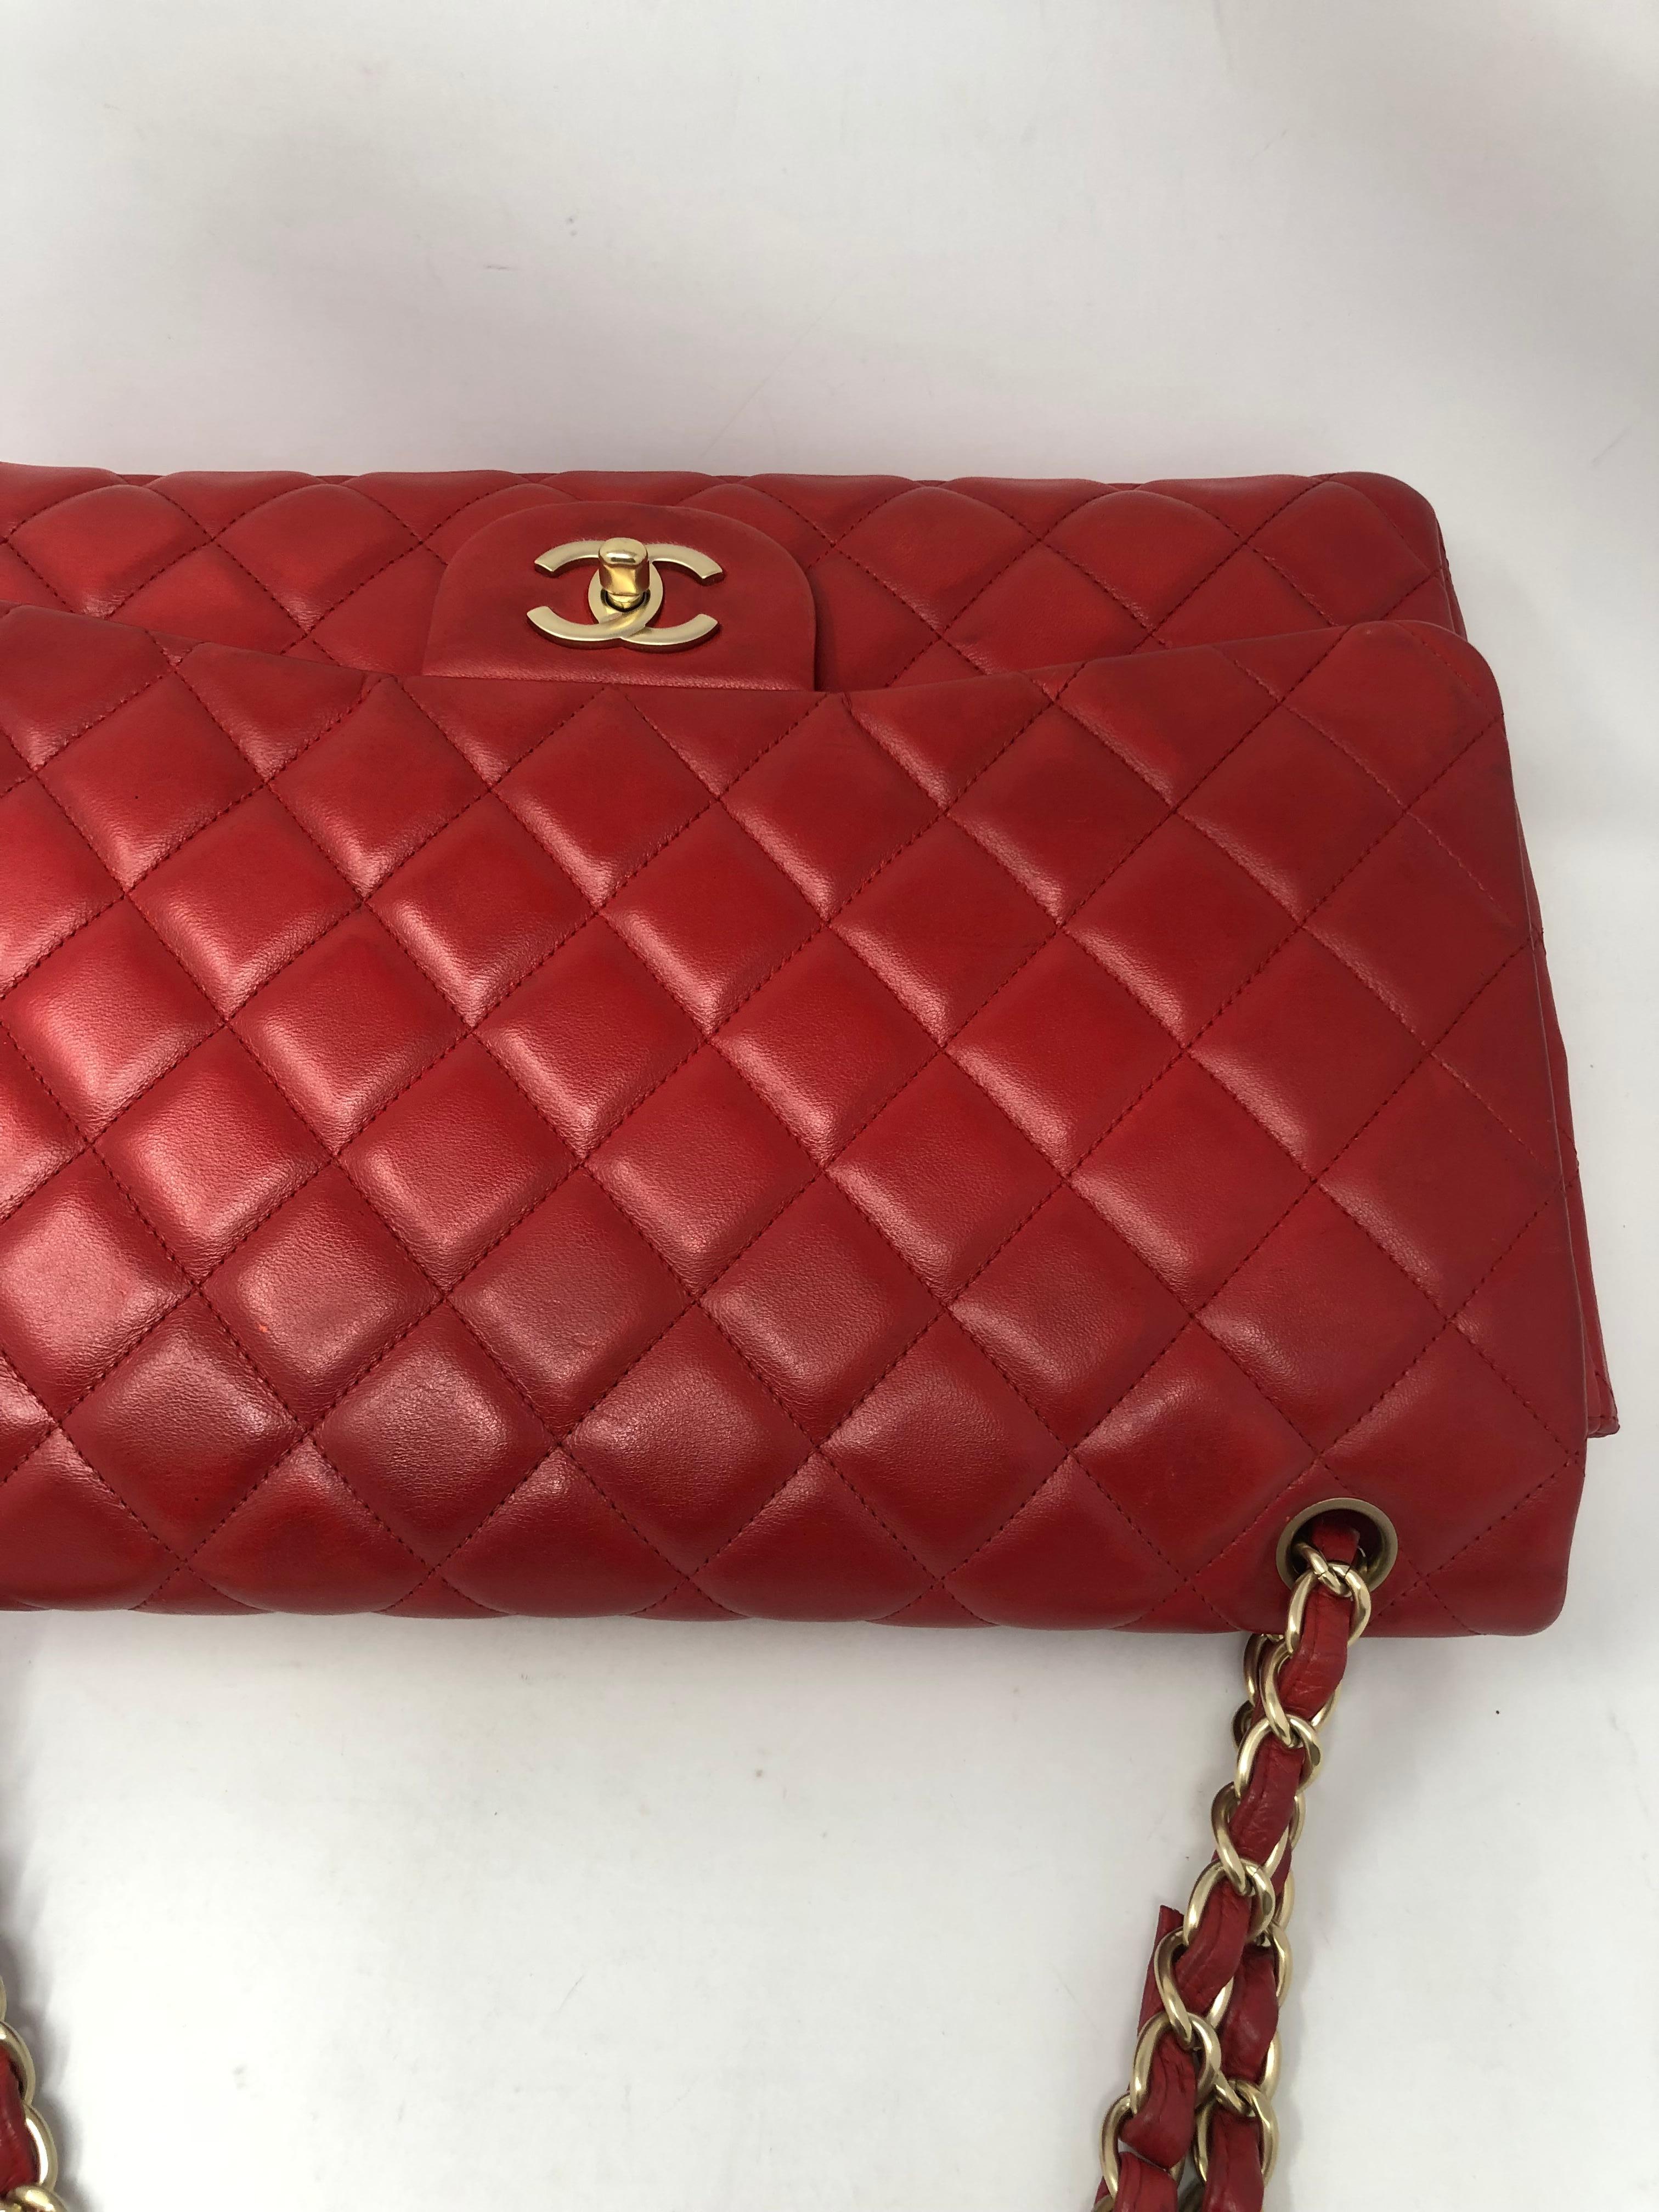 Chanel Red Maxi Bag 3